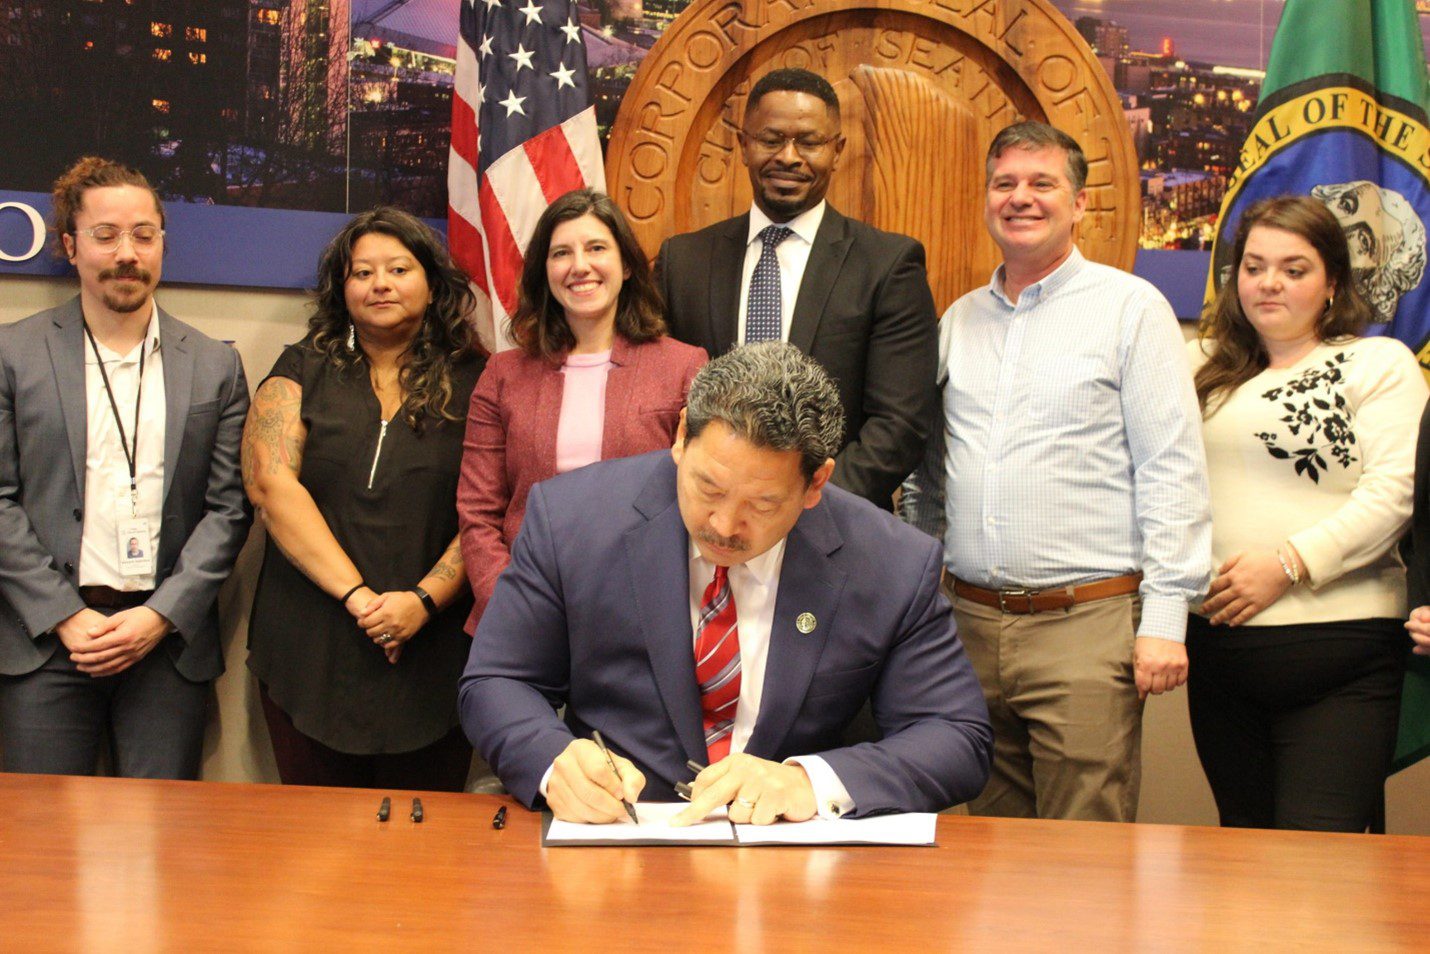 Photo of Seattle Mayor Bruce Harrell signing a new executive order. Several City leaders and department heads stand behind the Mayor, while watching him sign the order. The American flag, Washington State flag, and City of Seattle seal are in the background.